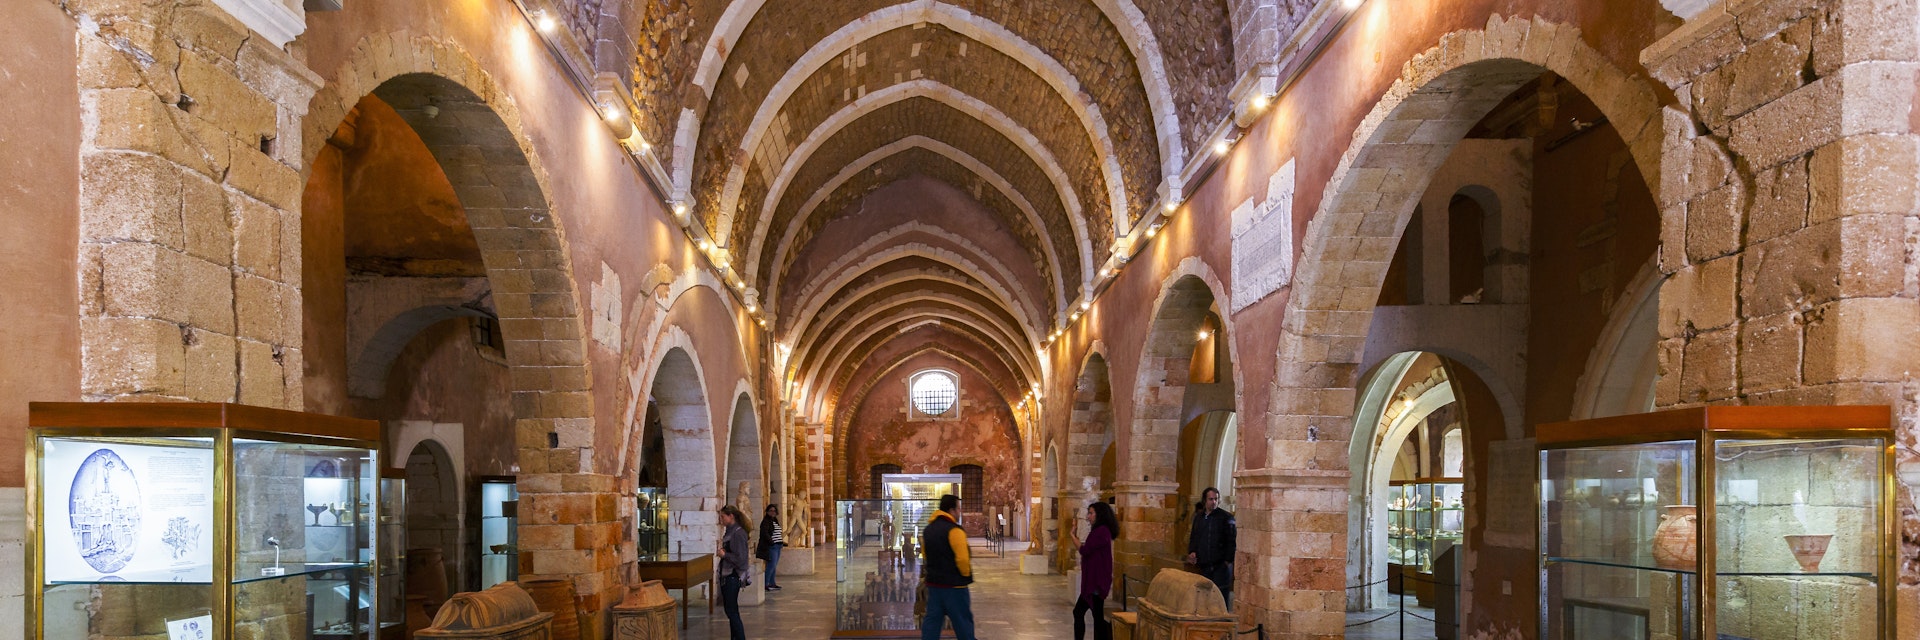 Chania, Greece - April 15, 2017: Exposition of Archaeological Museum of Chania, Greece.
651422344
exhibition,greek,art,past,aegean,exhibits,heritage,history,people,building,crete,interior,mediterranean,greece,museum,culture,archaeology,archaeological museum,exposition,chania